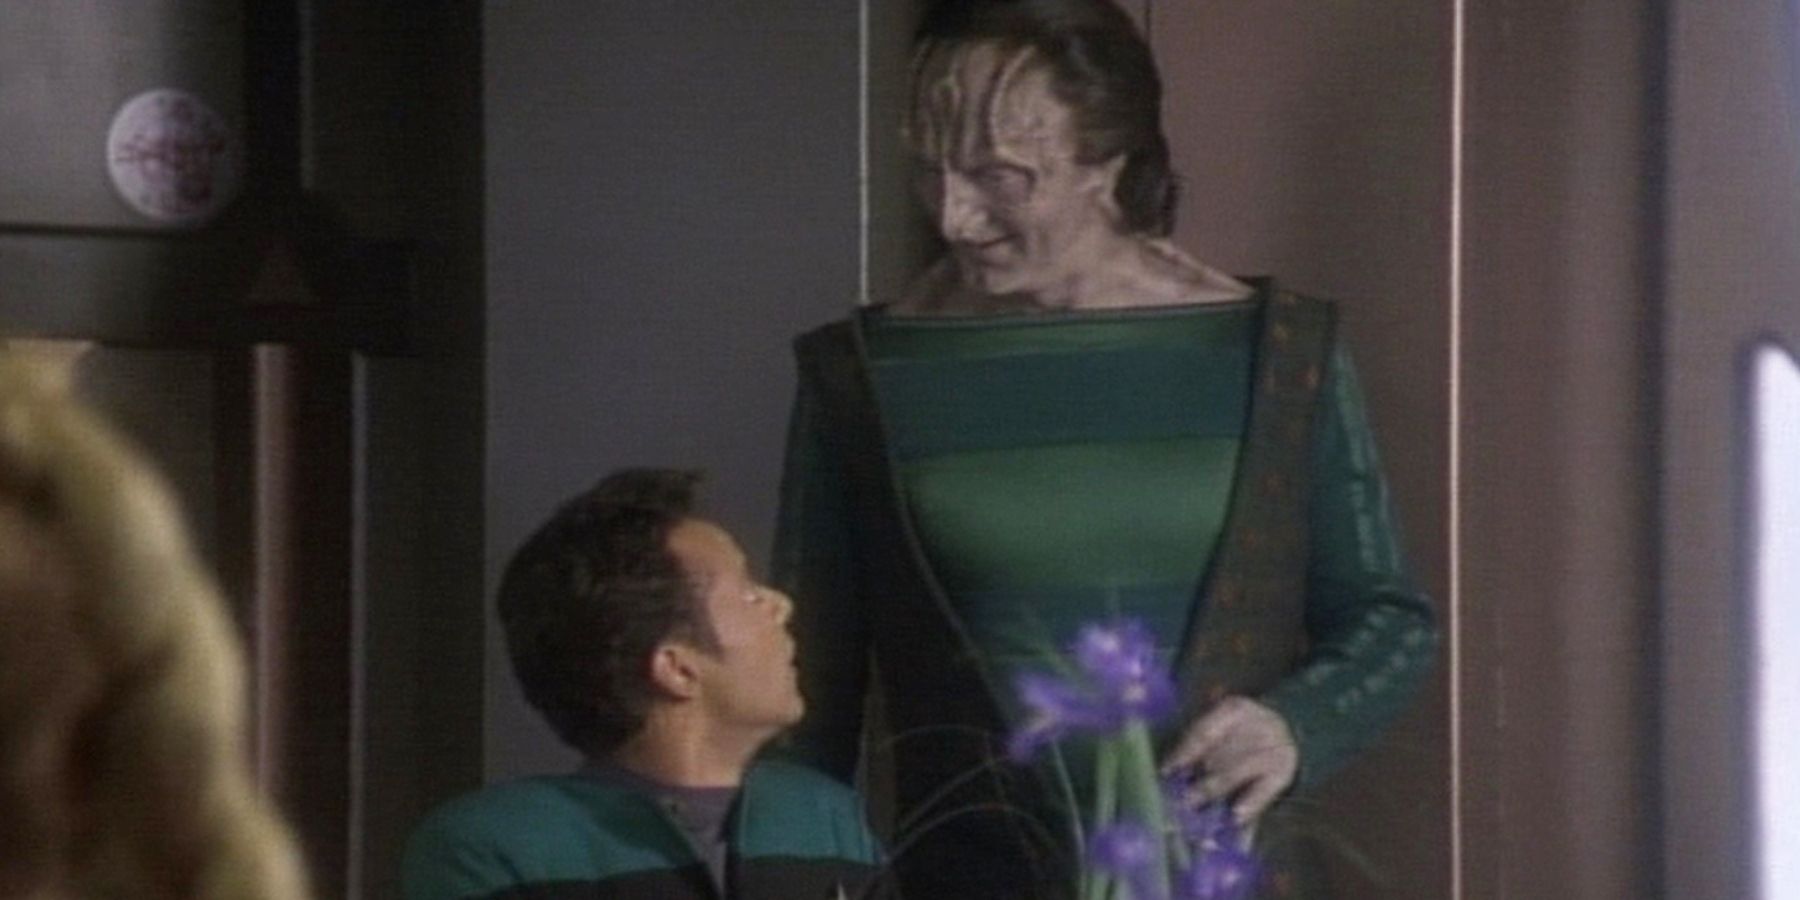 A young Dr. Bashir (portrayed by Alexander Siddig,) looks up at Garak (portrayed by Andrew Robinson,) in a clearly off-kilter way as Garak looks smug. Siddig has tan skin and short brown hair, and wears a blue and black uniform. Garak has grey skin, ridges on his forehead and around his eyes that show he's a Cardassian, and nearly shoulder-length black hair. Garak wears a blue-and-green striped top with a brown vest.